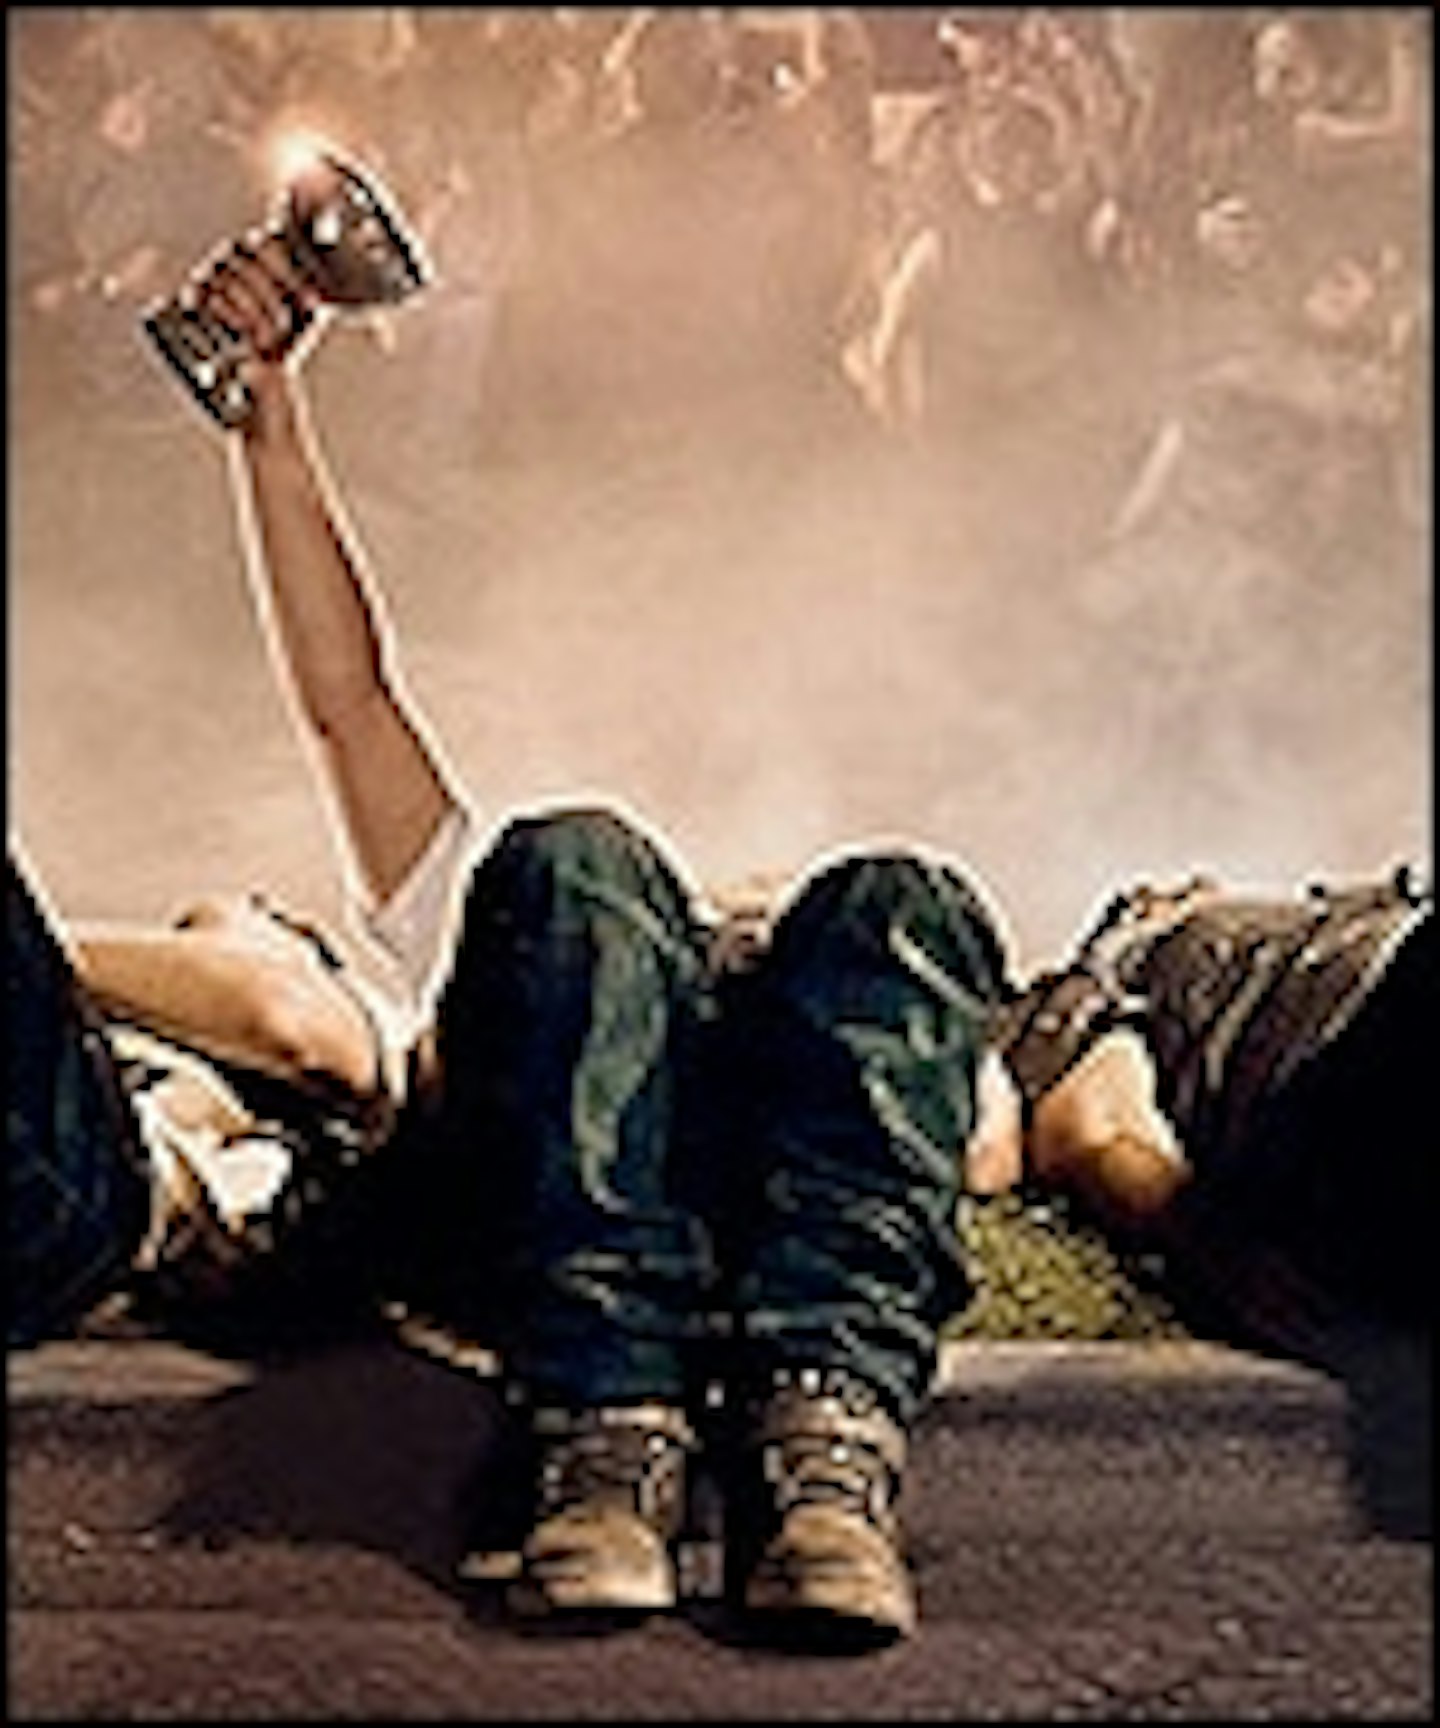 New Project X Trailer Online